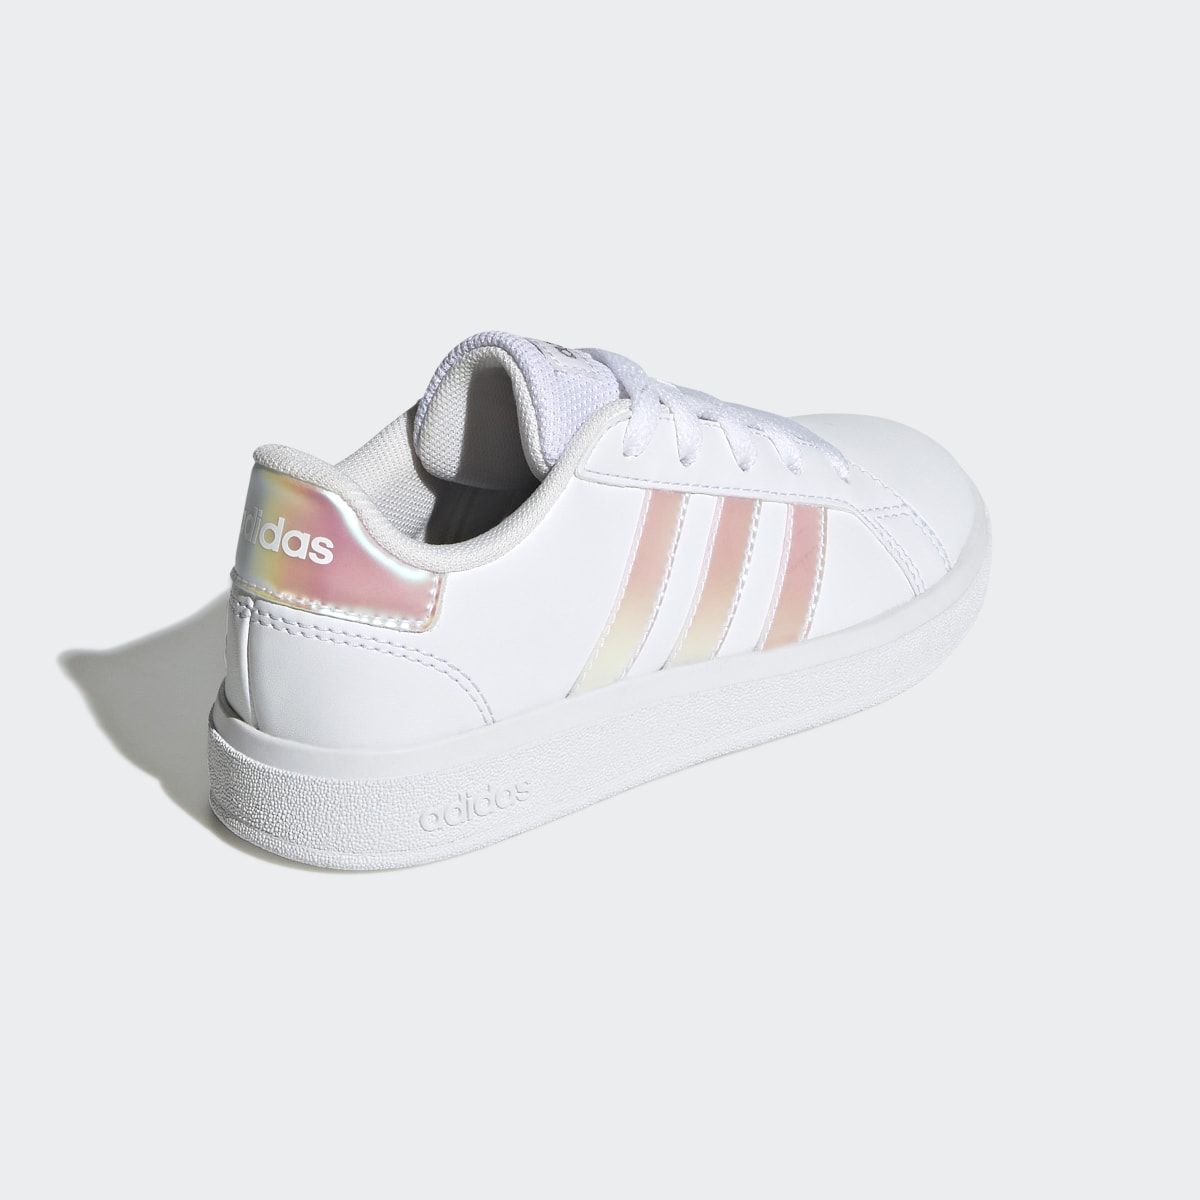 Adidas Grand Court Lifestyle Lace Tennis Shoes. 6